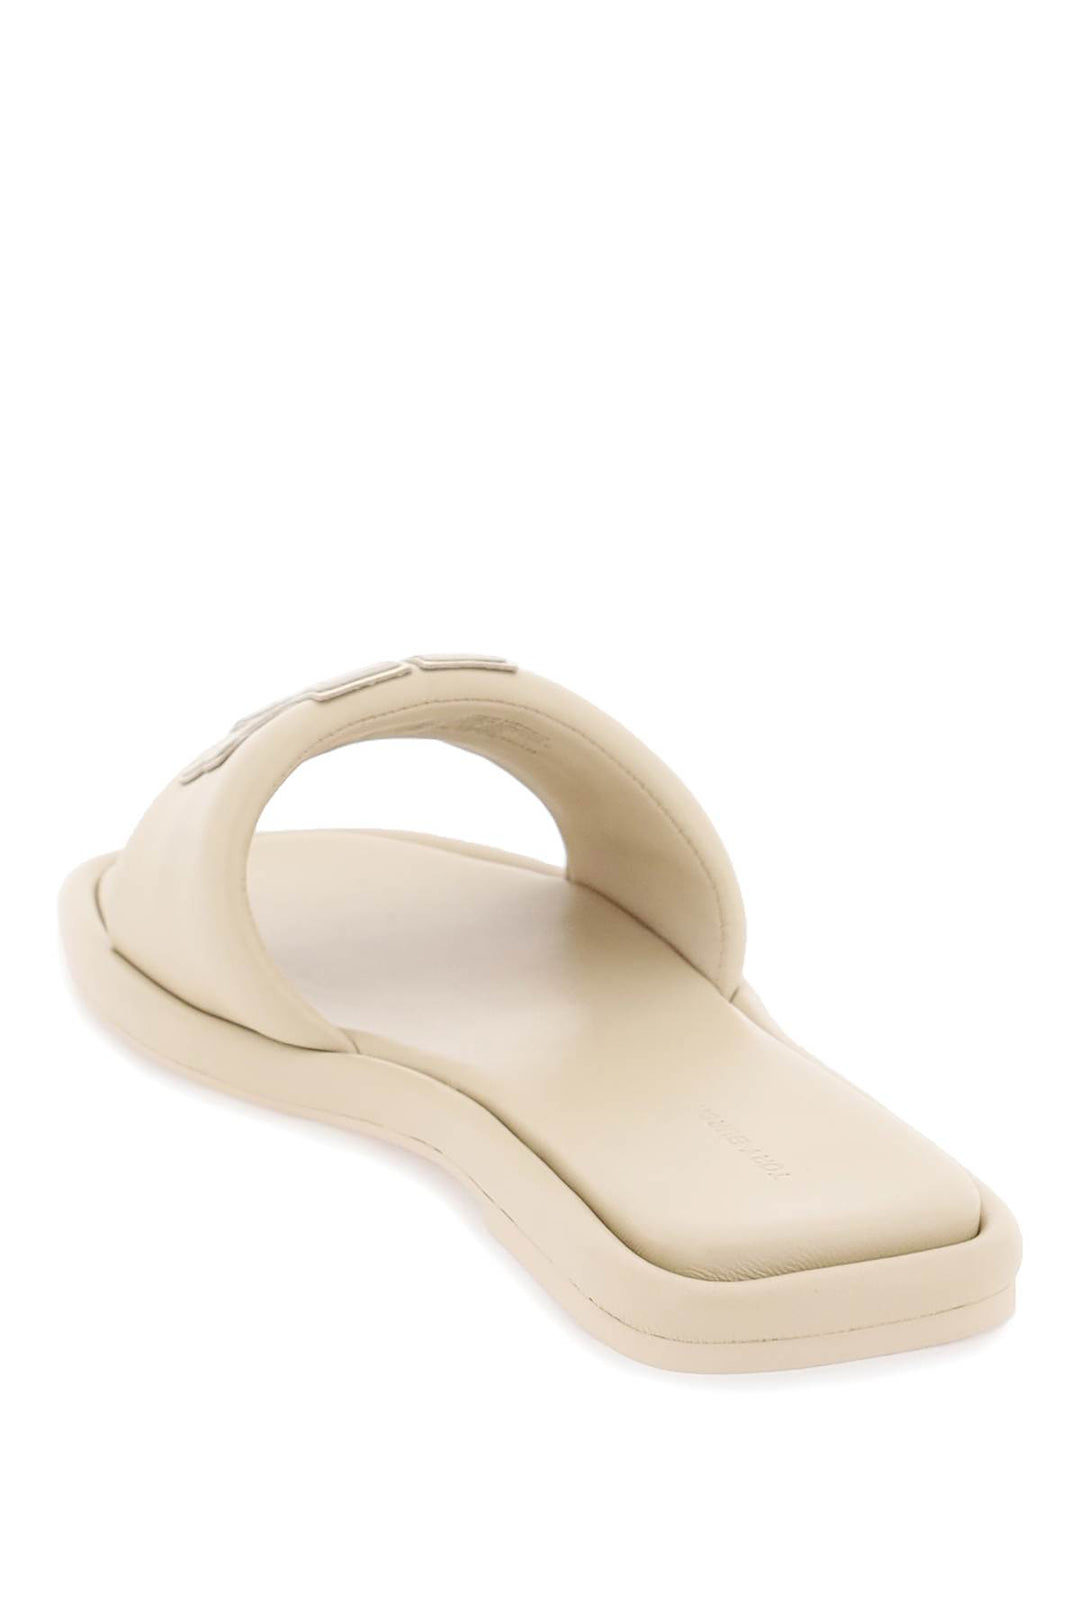 Tory Burch Double T Leather Slides   Beige